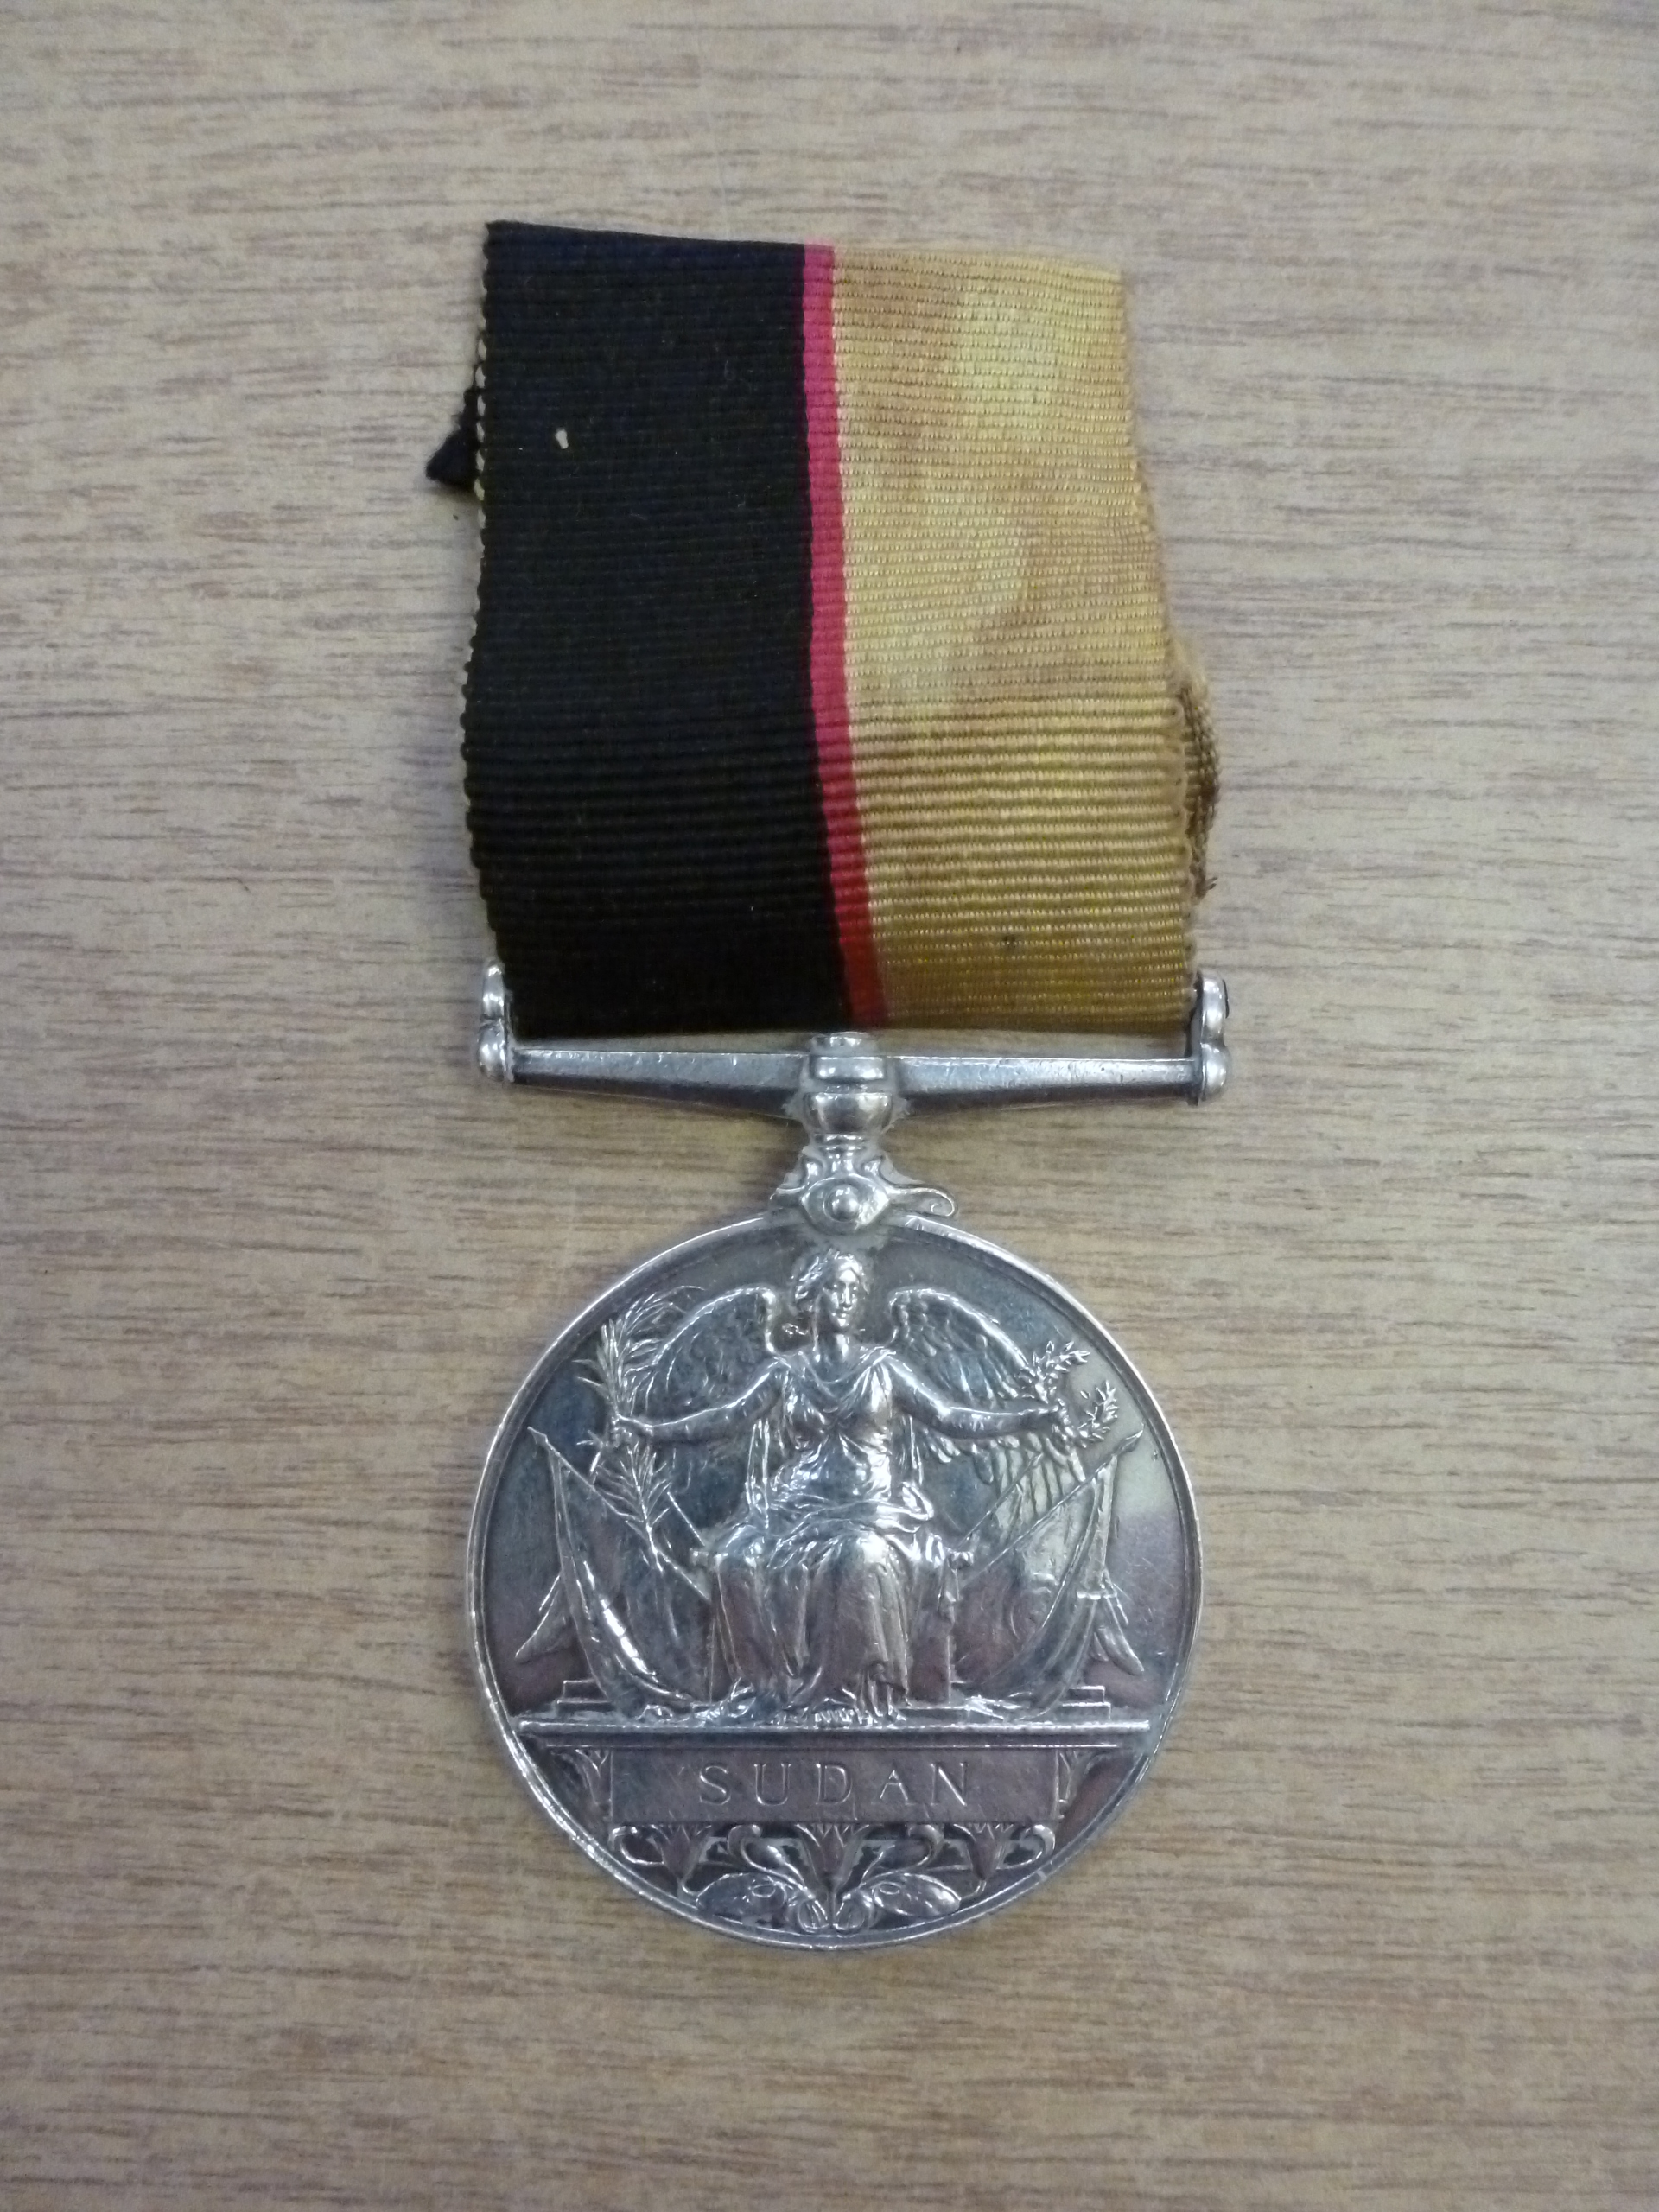 A Queen Victoria Sudan medal awarded to 26945 Corporal G. Watson